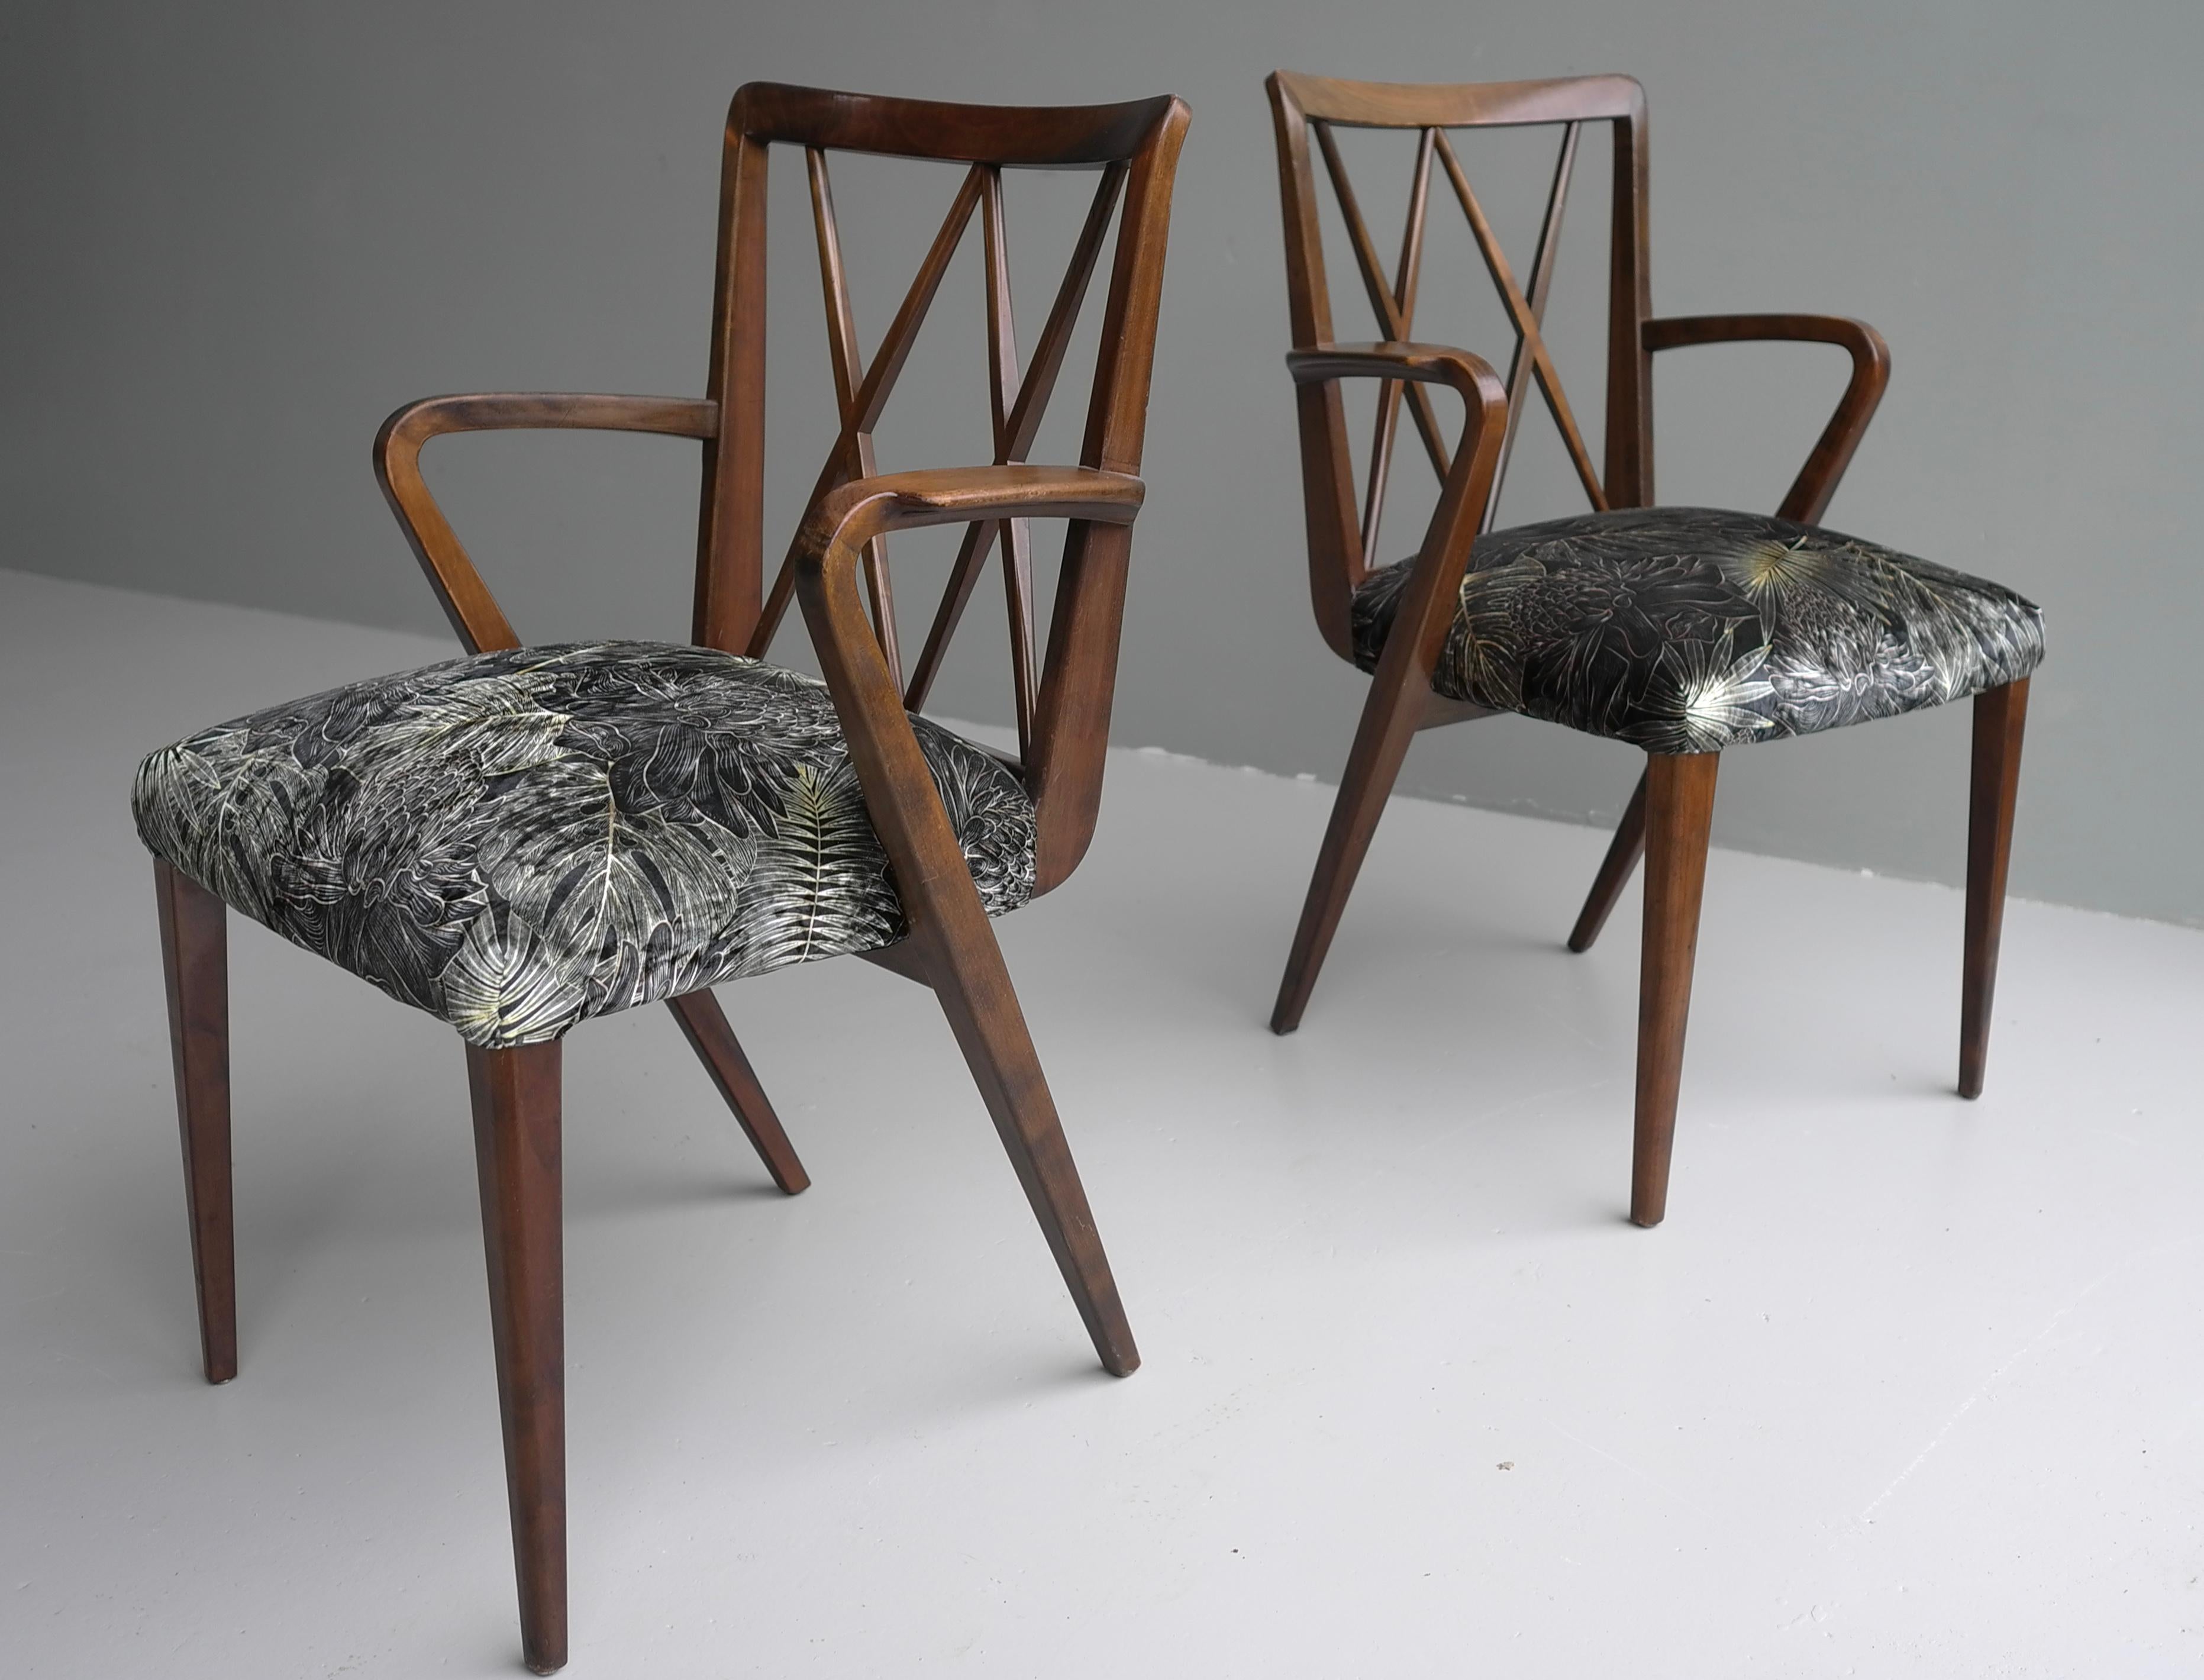 Dutch Abraham A Patijn Poly-Z Tropical side Chairs in Walnut, The Netherlands, 1950s For Sale